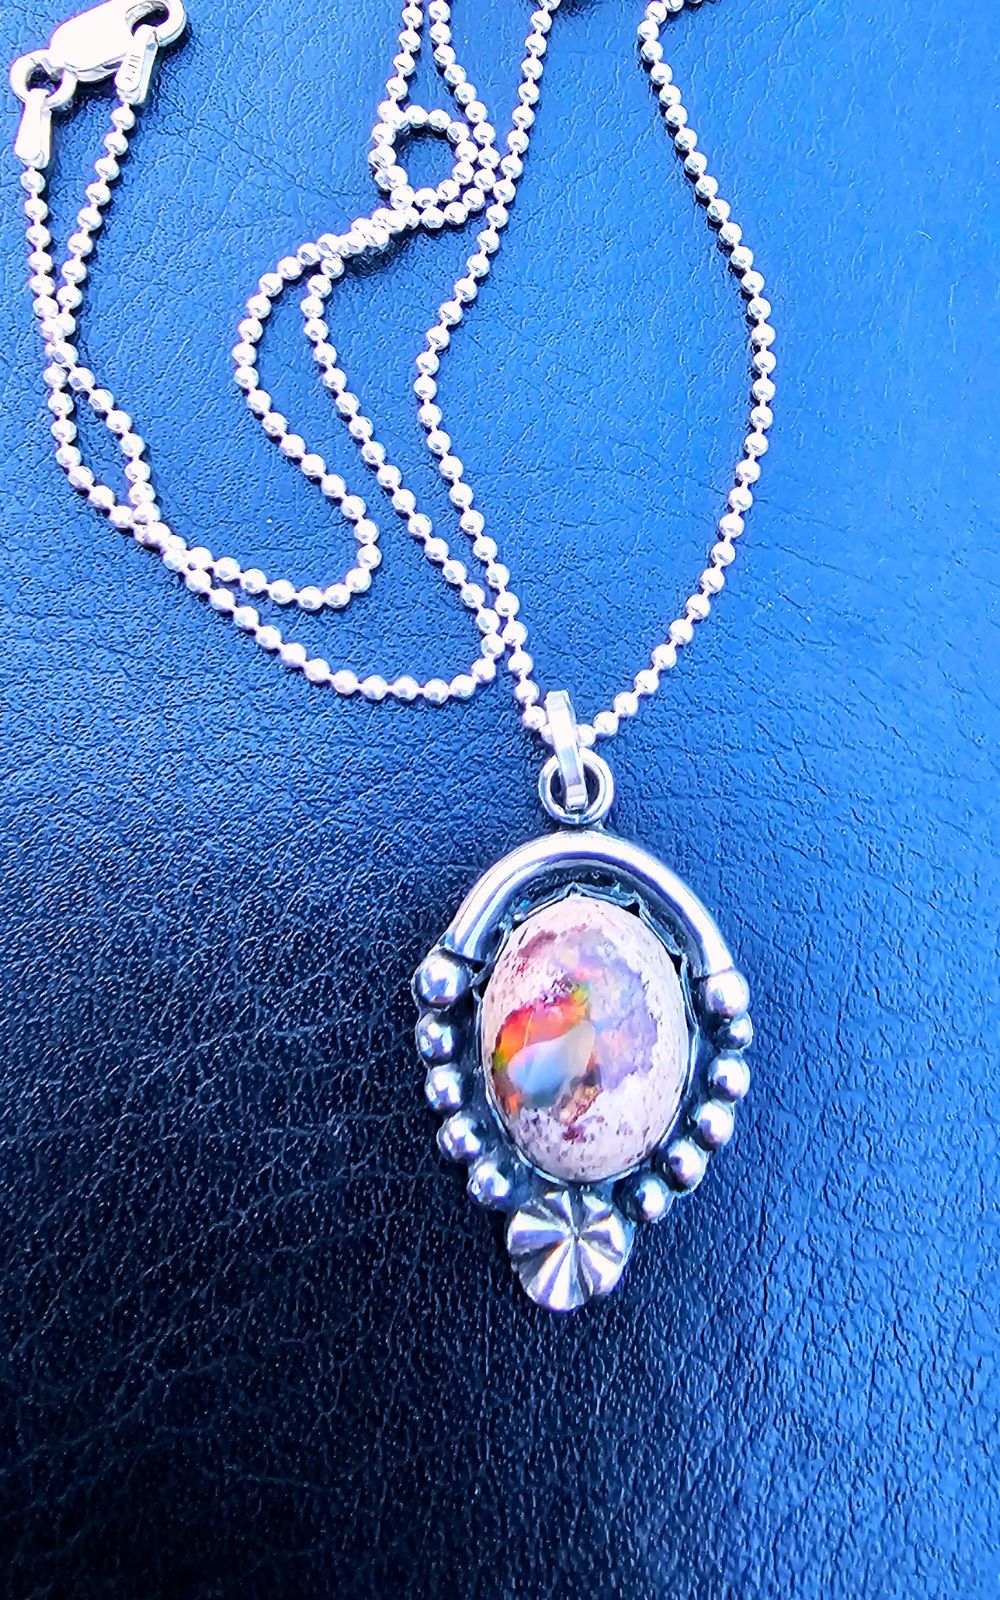 Mexican Fire Opal Pendant - A Unique and Radiant October Birthstone Jewelry